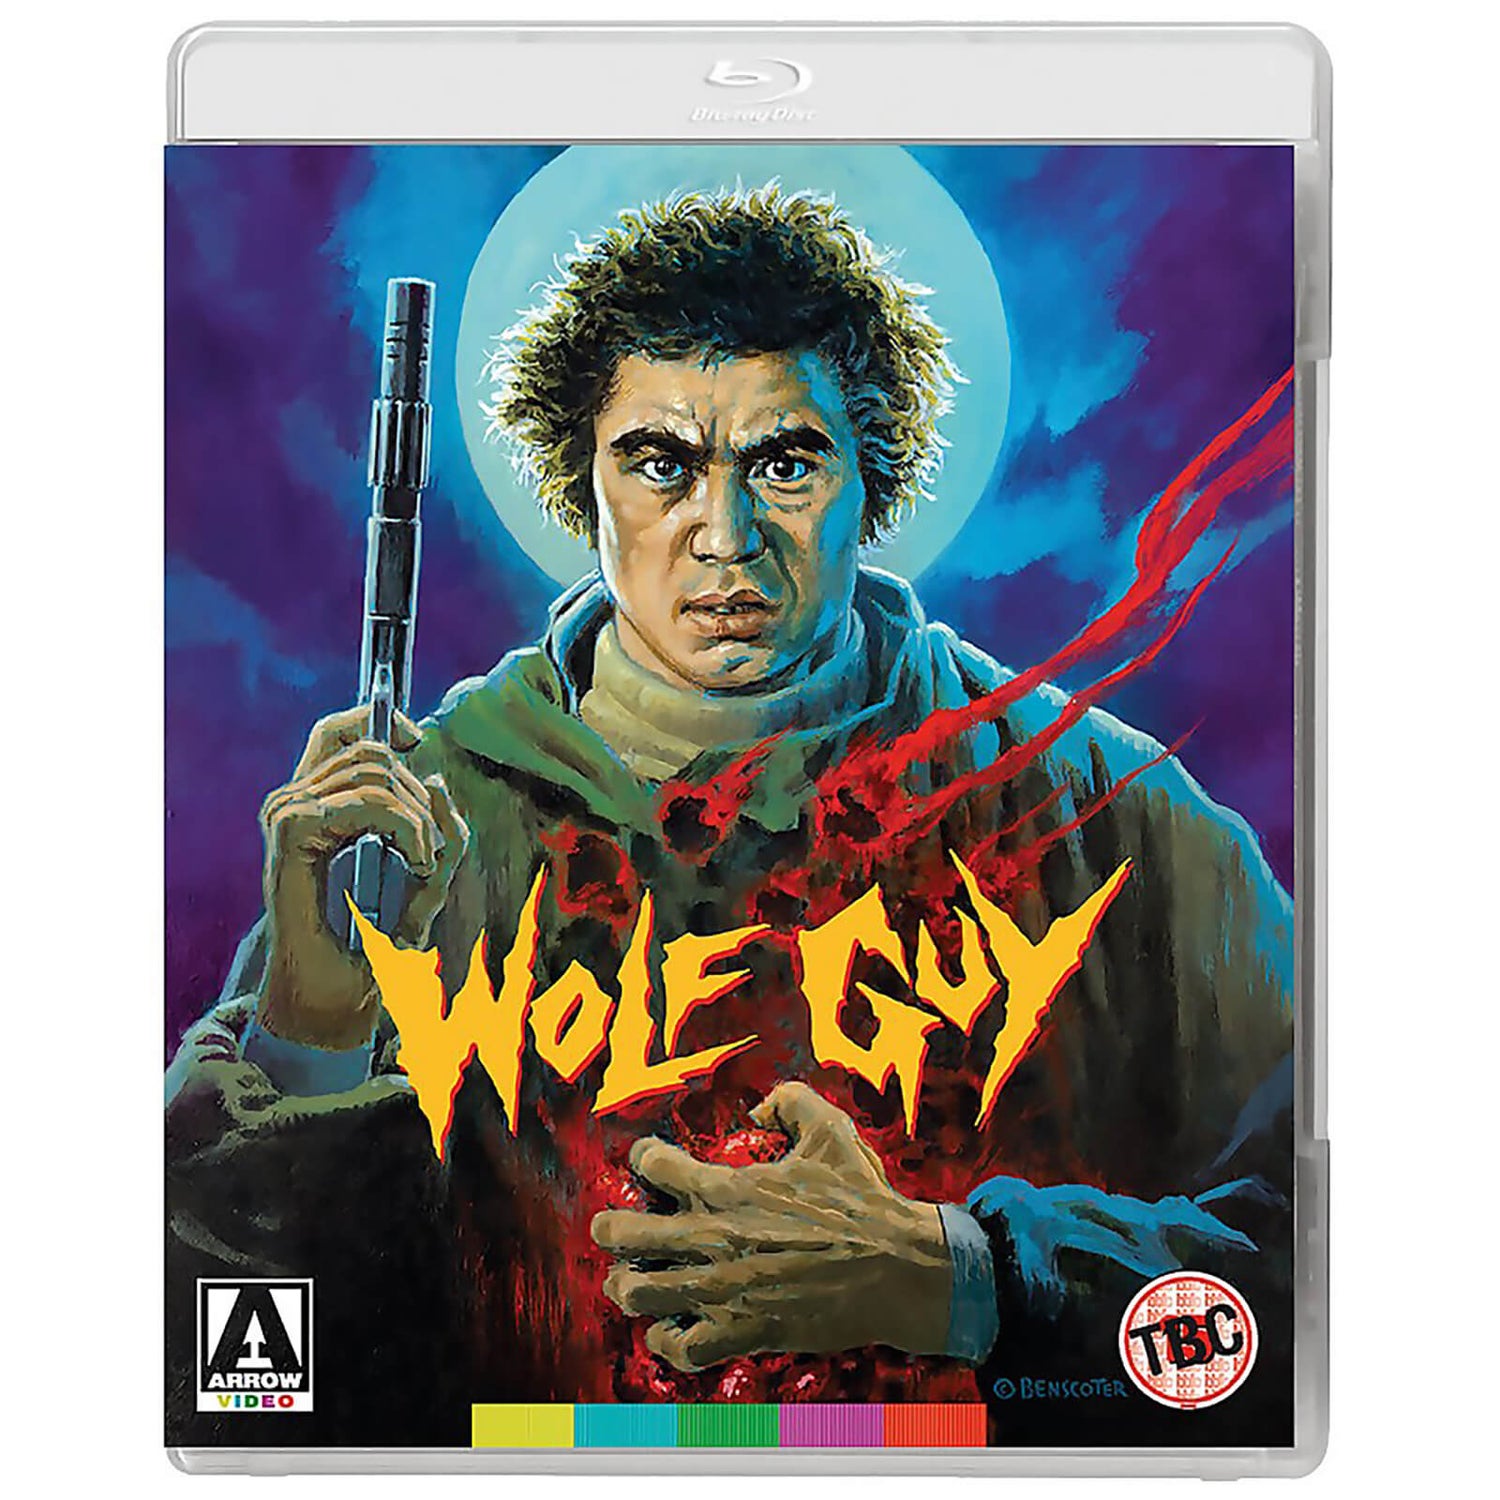 Wolfguy - Dual Format (Includes DVD)